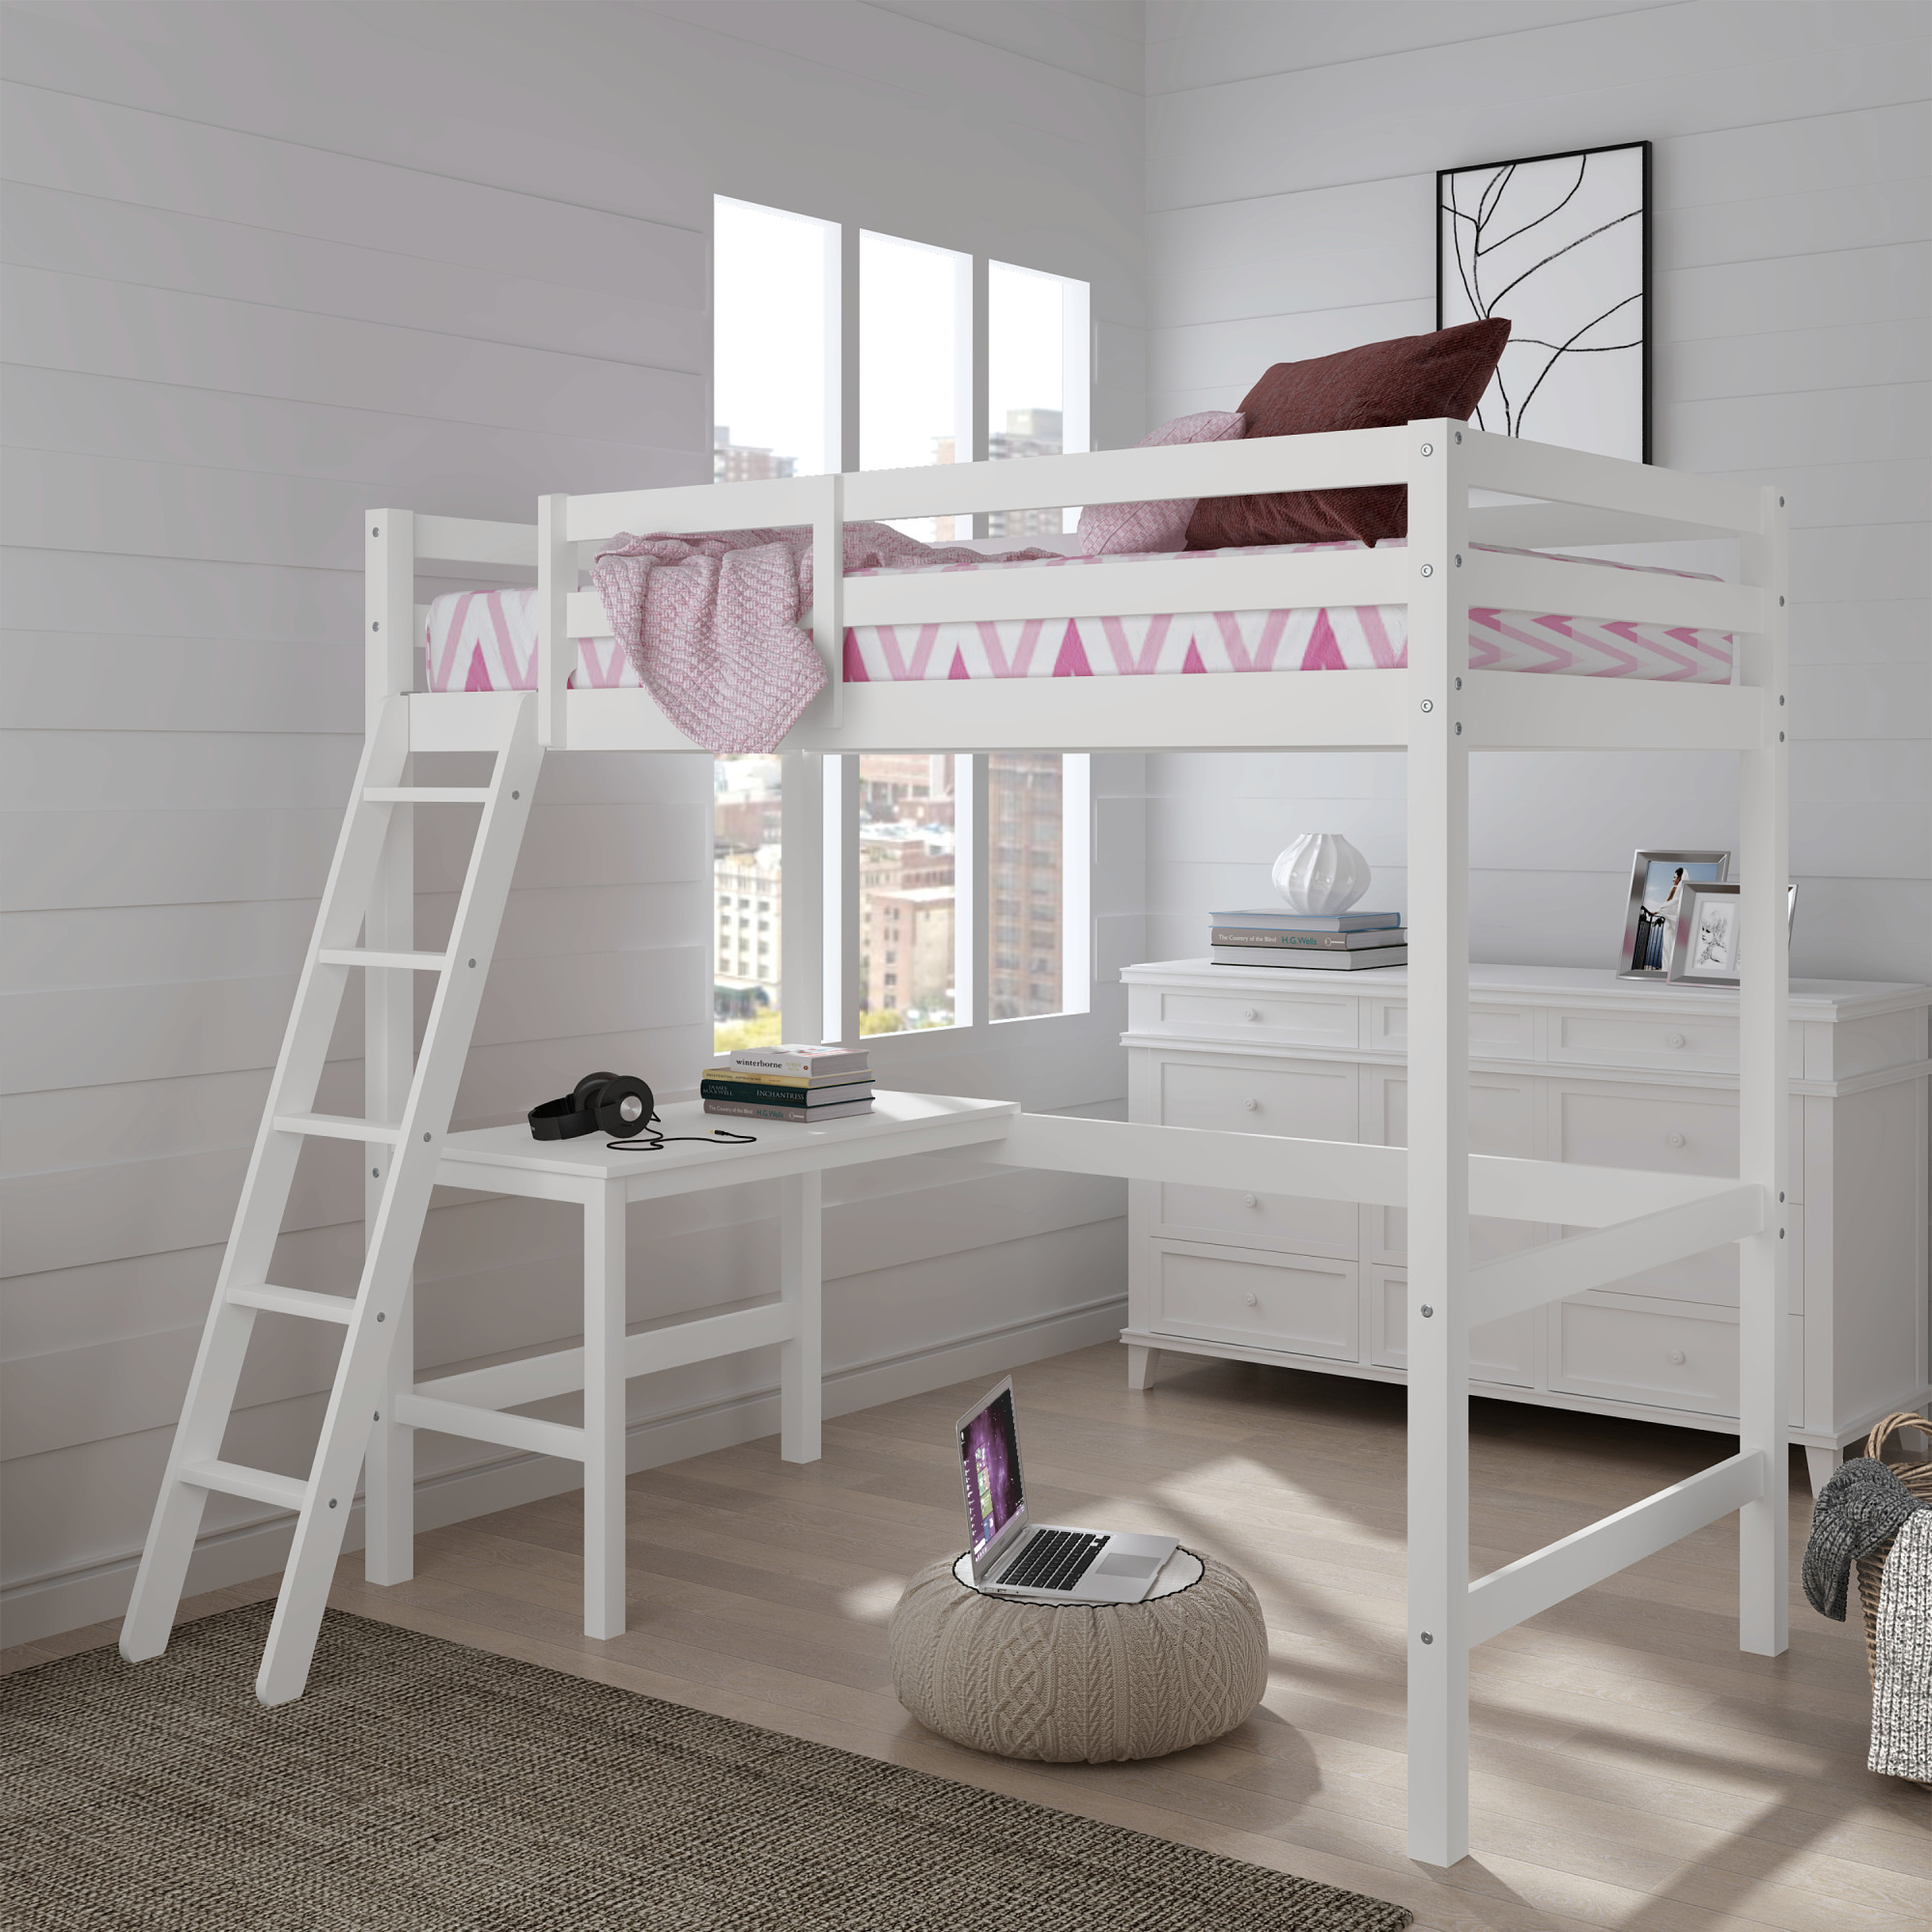 Hillsdale Campbell Wood Twin Loft Bunk Bed with Desk, White - image 1 of 14